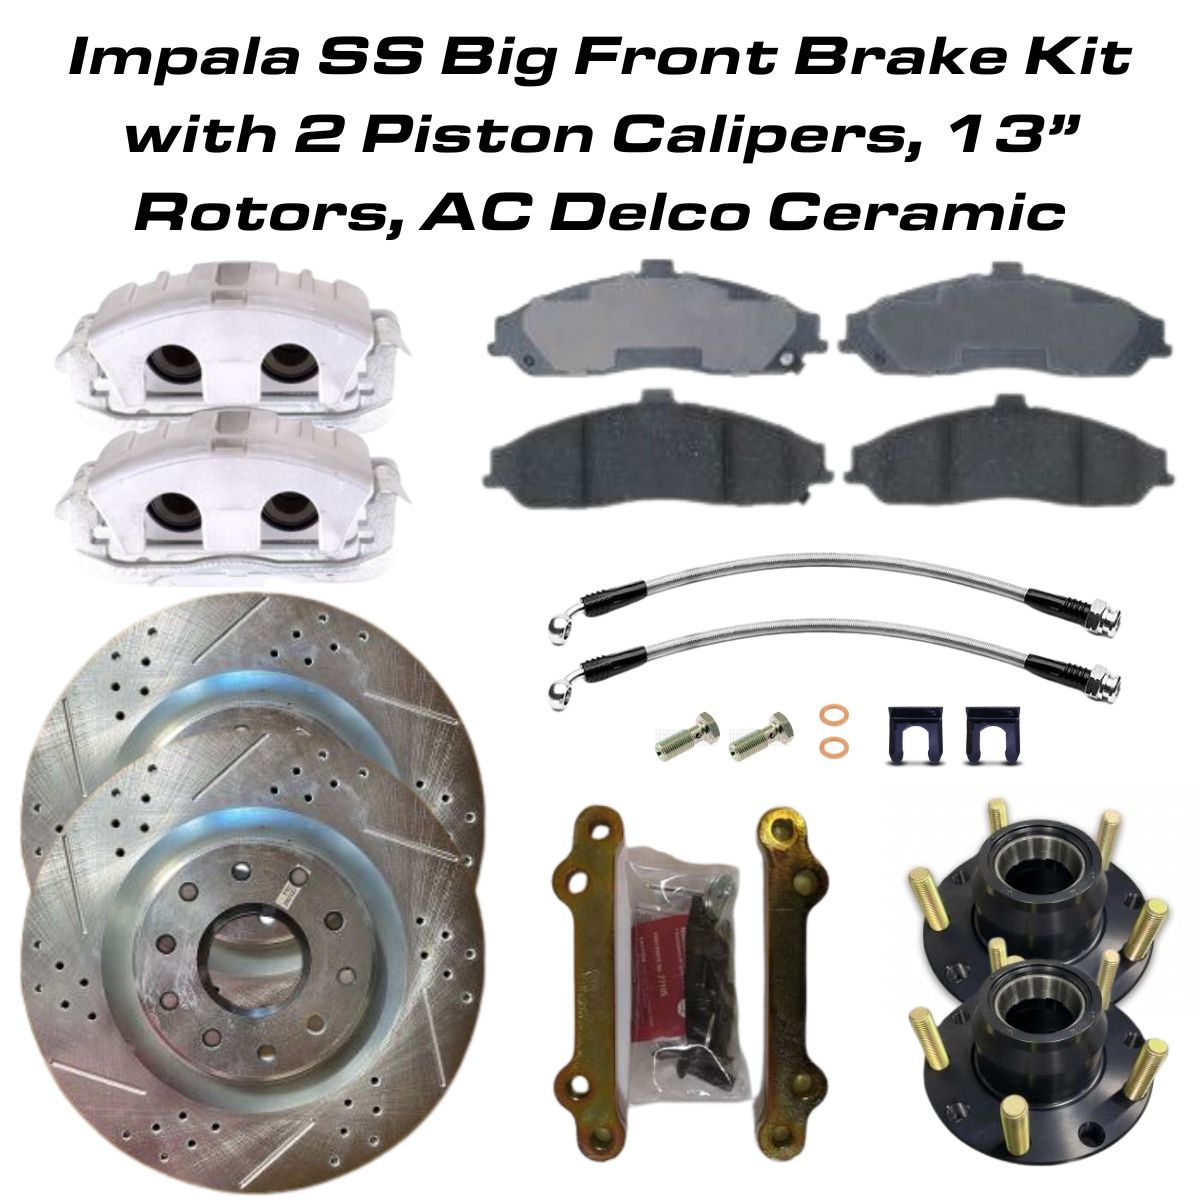 Impala SS Big Front Brake Kit with 2 Piston Calipers, 13 Inch Rotors, AC Delco Ceramic Pads